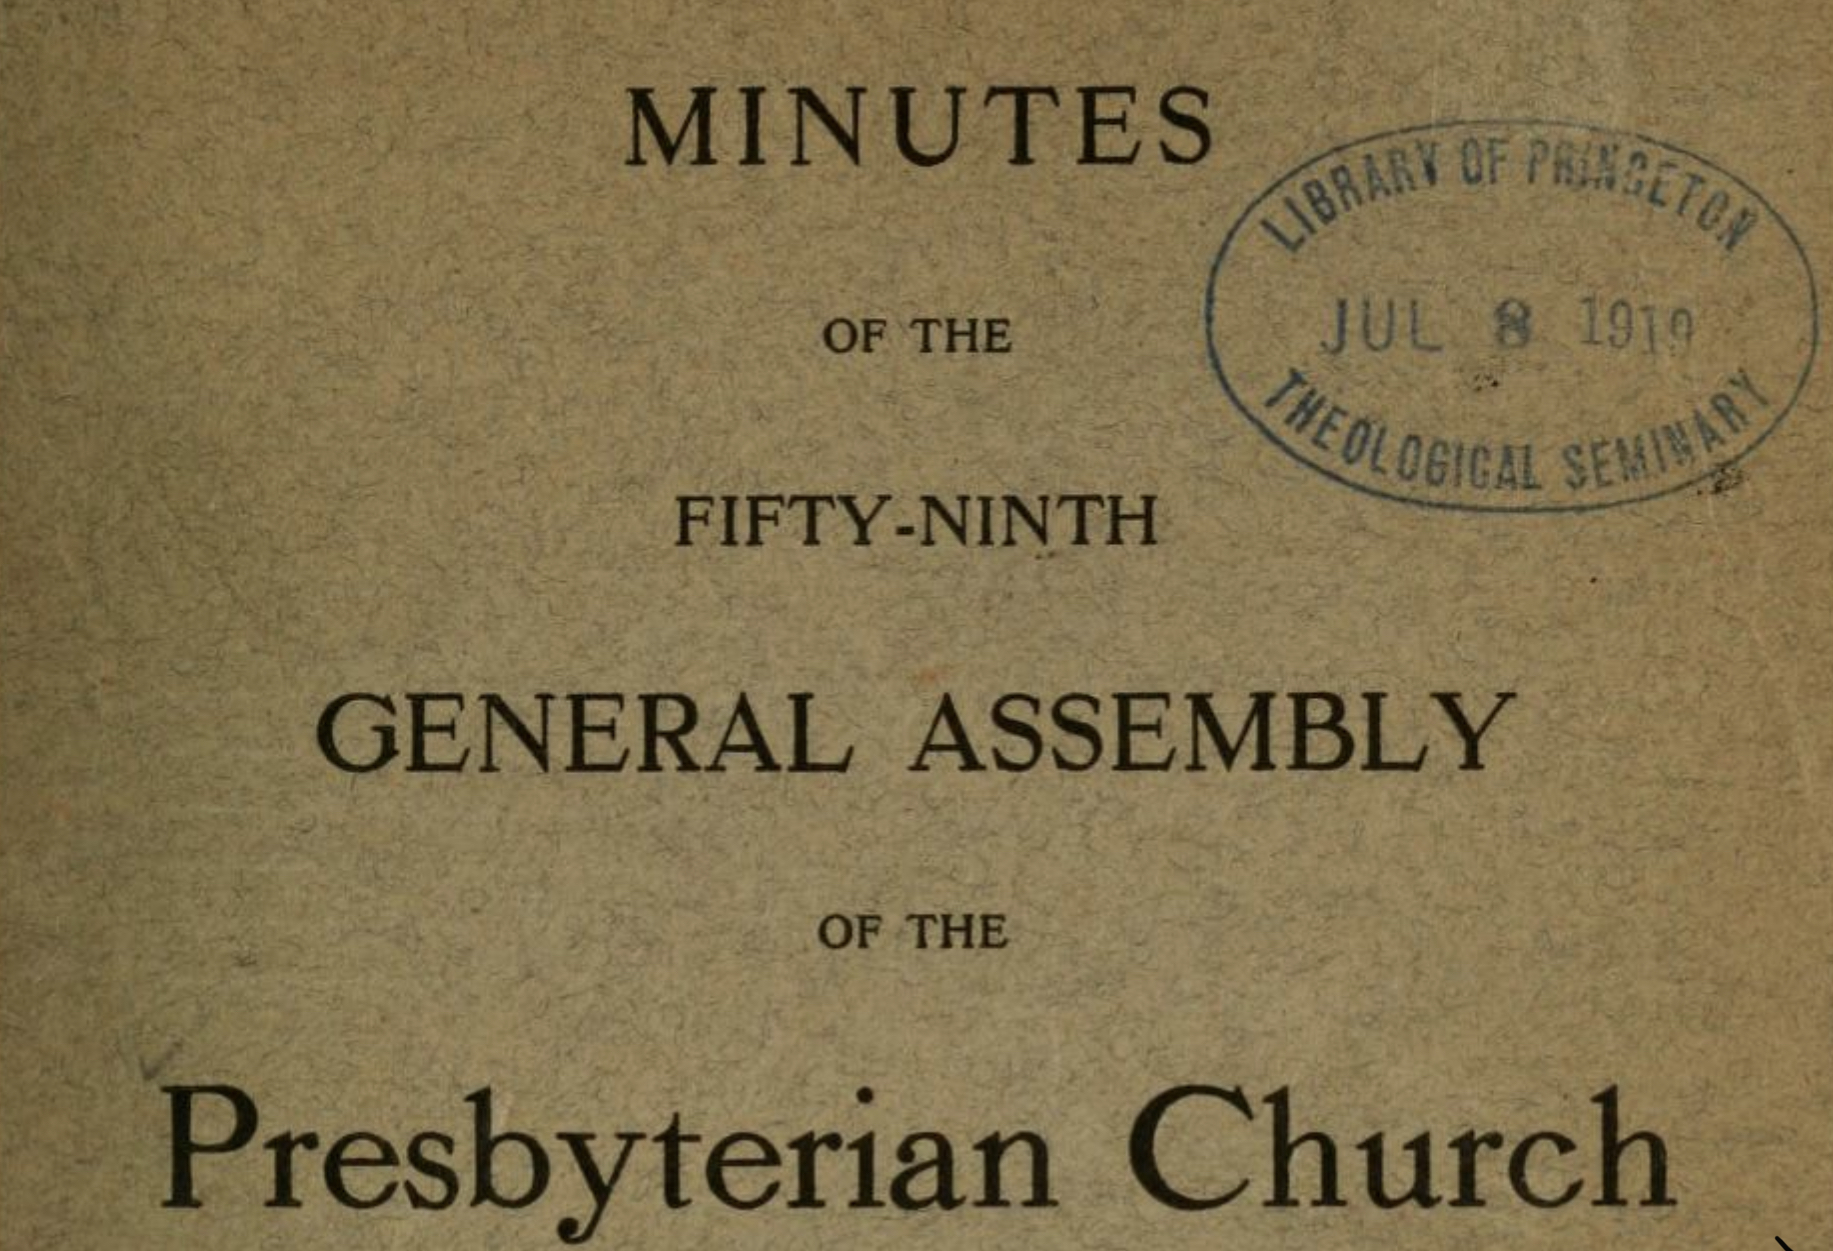 The impact of the Spanish Flu on the Southern Presbyterian Church